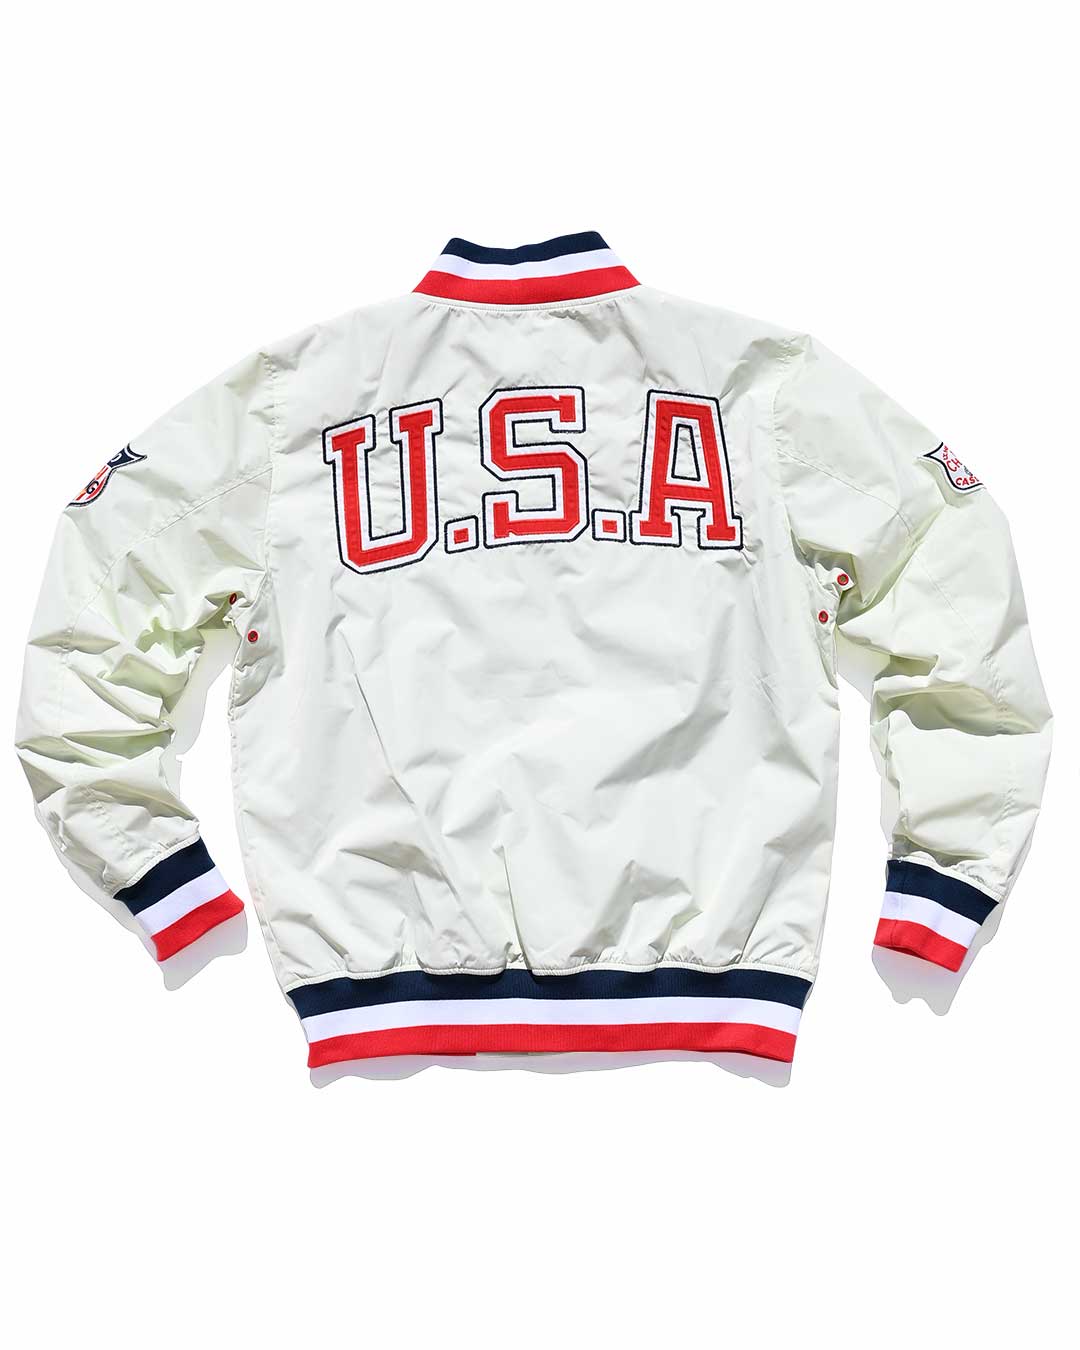 Cassius Clay USA Champ Stadium Jacket - Roots of Fight